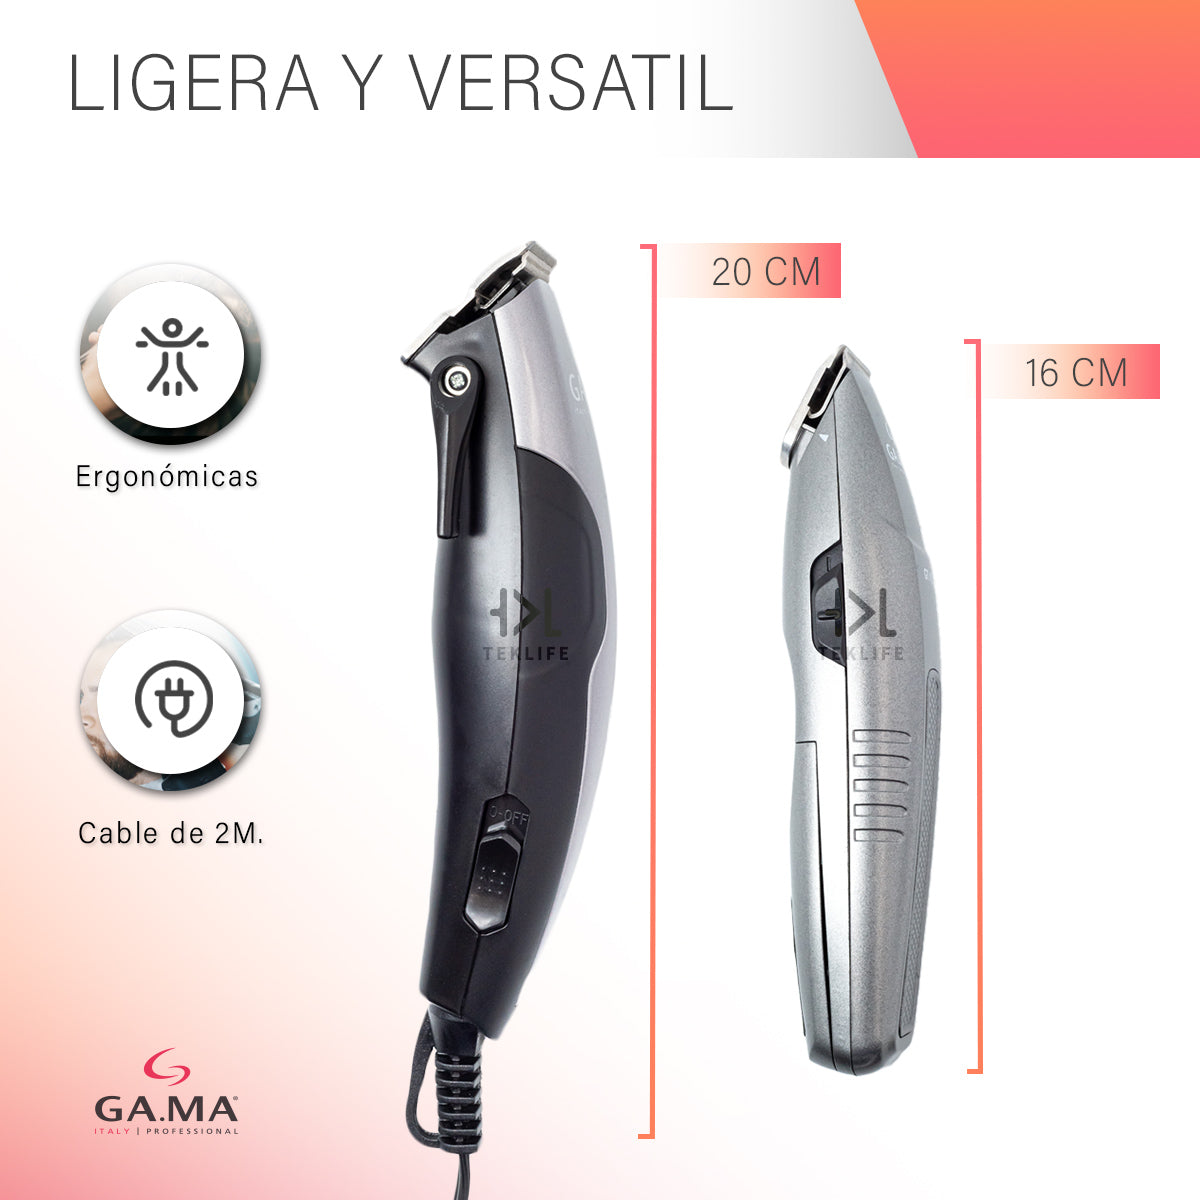 Combo Power Pack Clipper y Trimmer GAMA Profesional